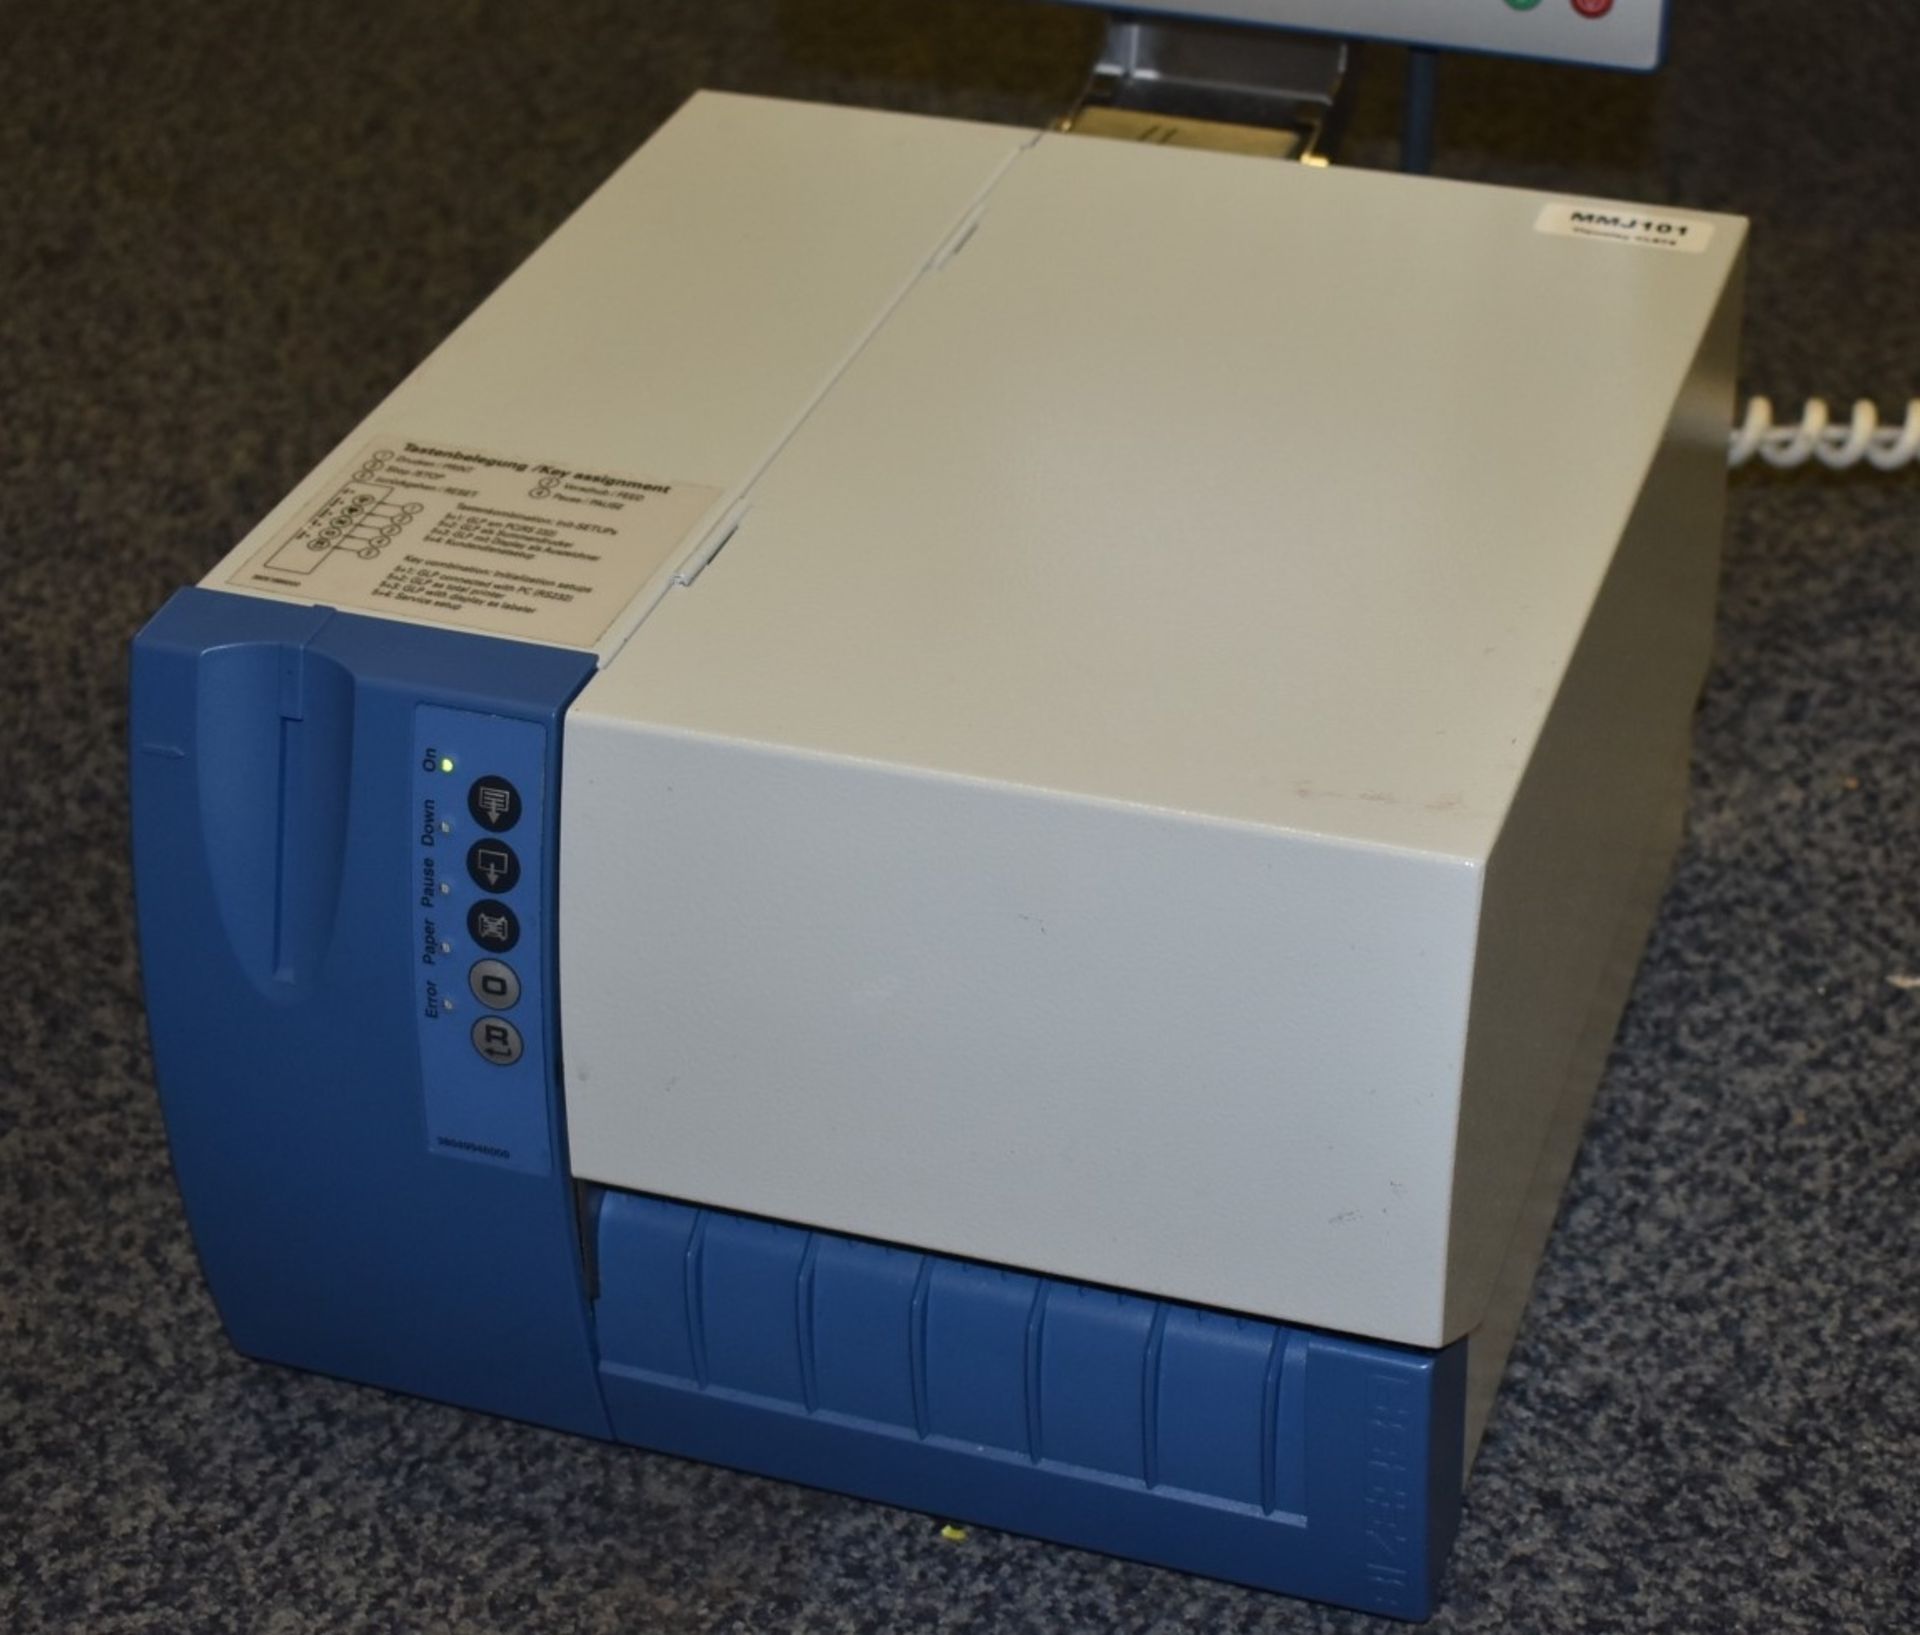 1 x Bizerba Industrial Label Printer GLPmaxx 160 With Colour Screen - Recently Removed From a - Image 5 of 15